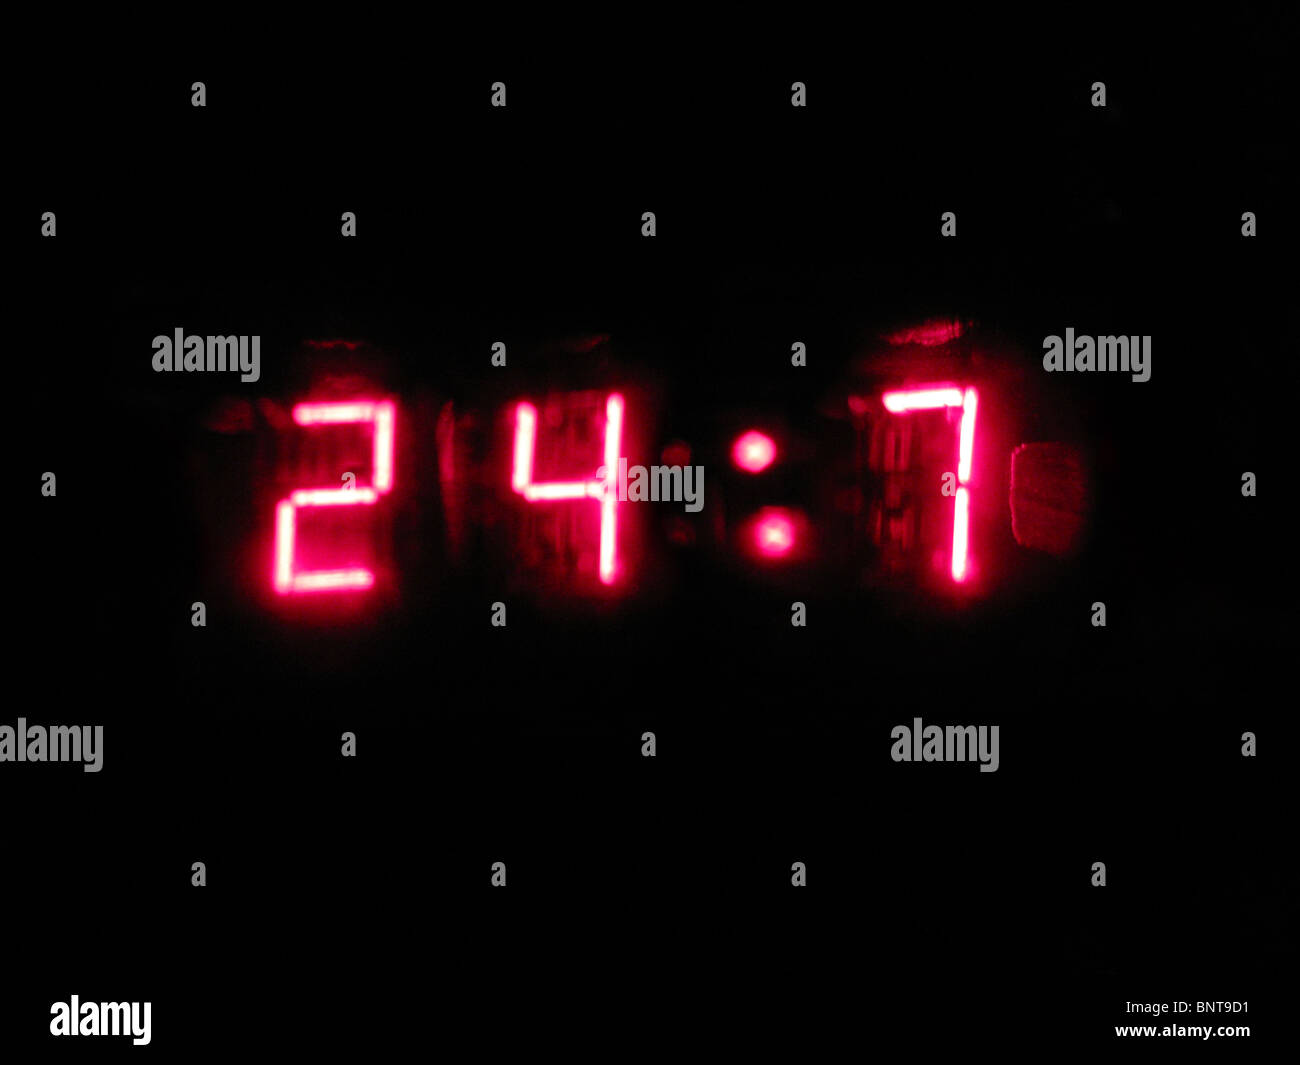 A close up of the numbers 24-7, as displayed on a retro digital wrist watch. Stock Photo